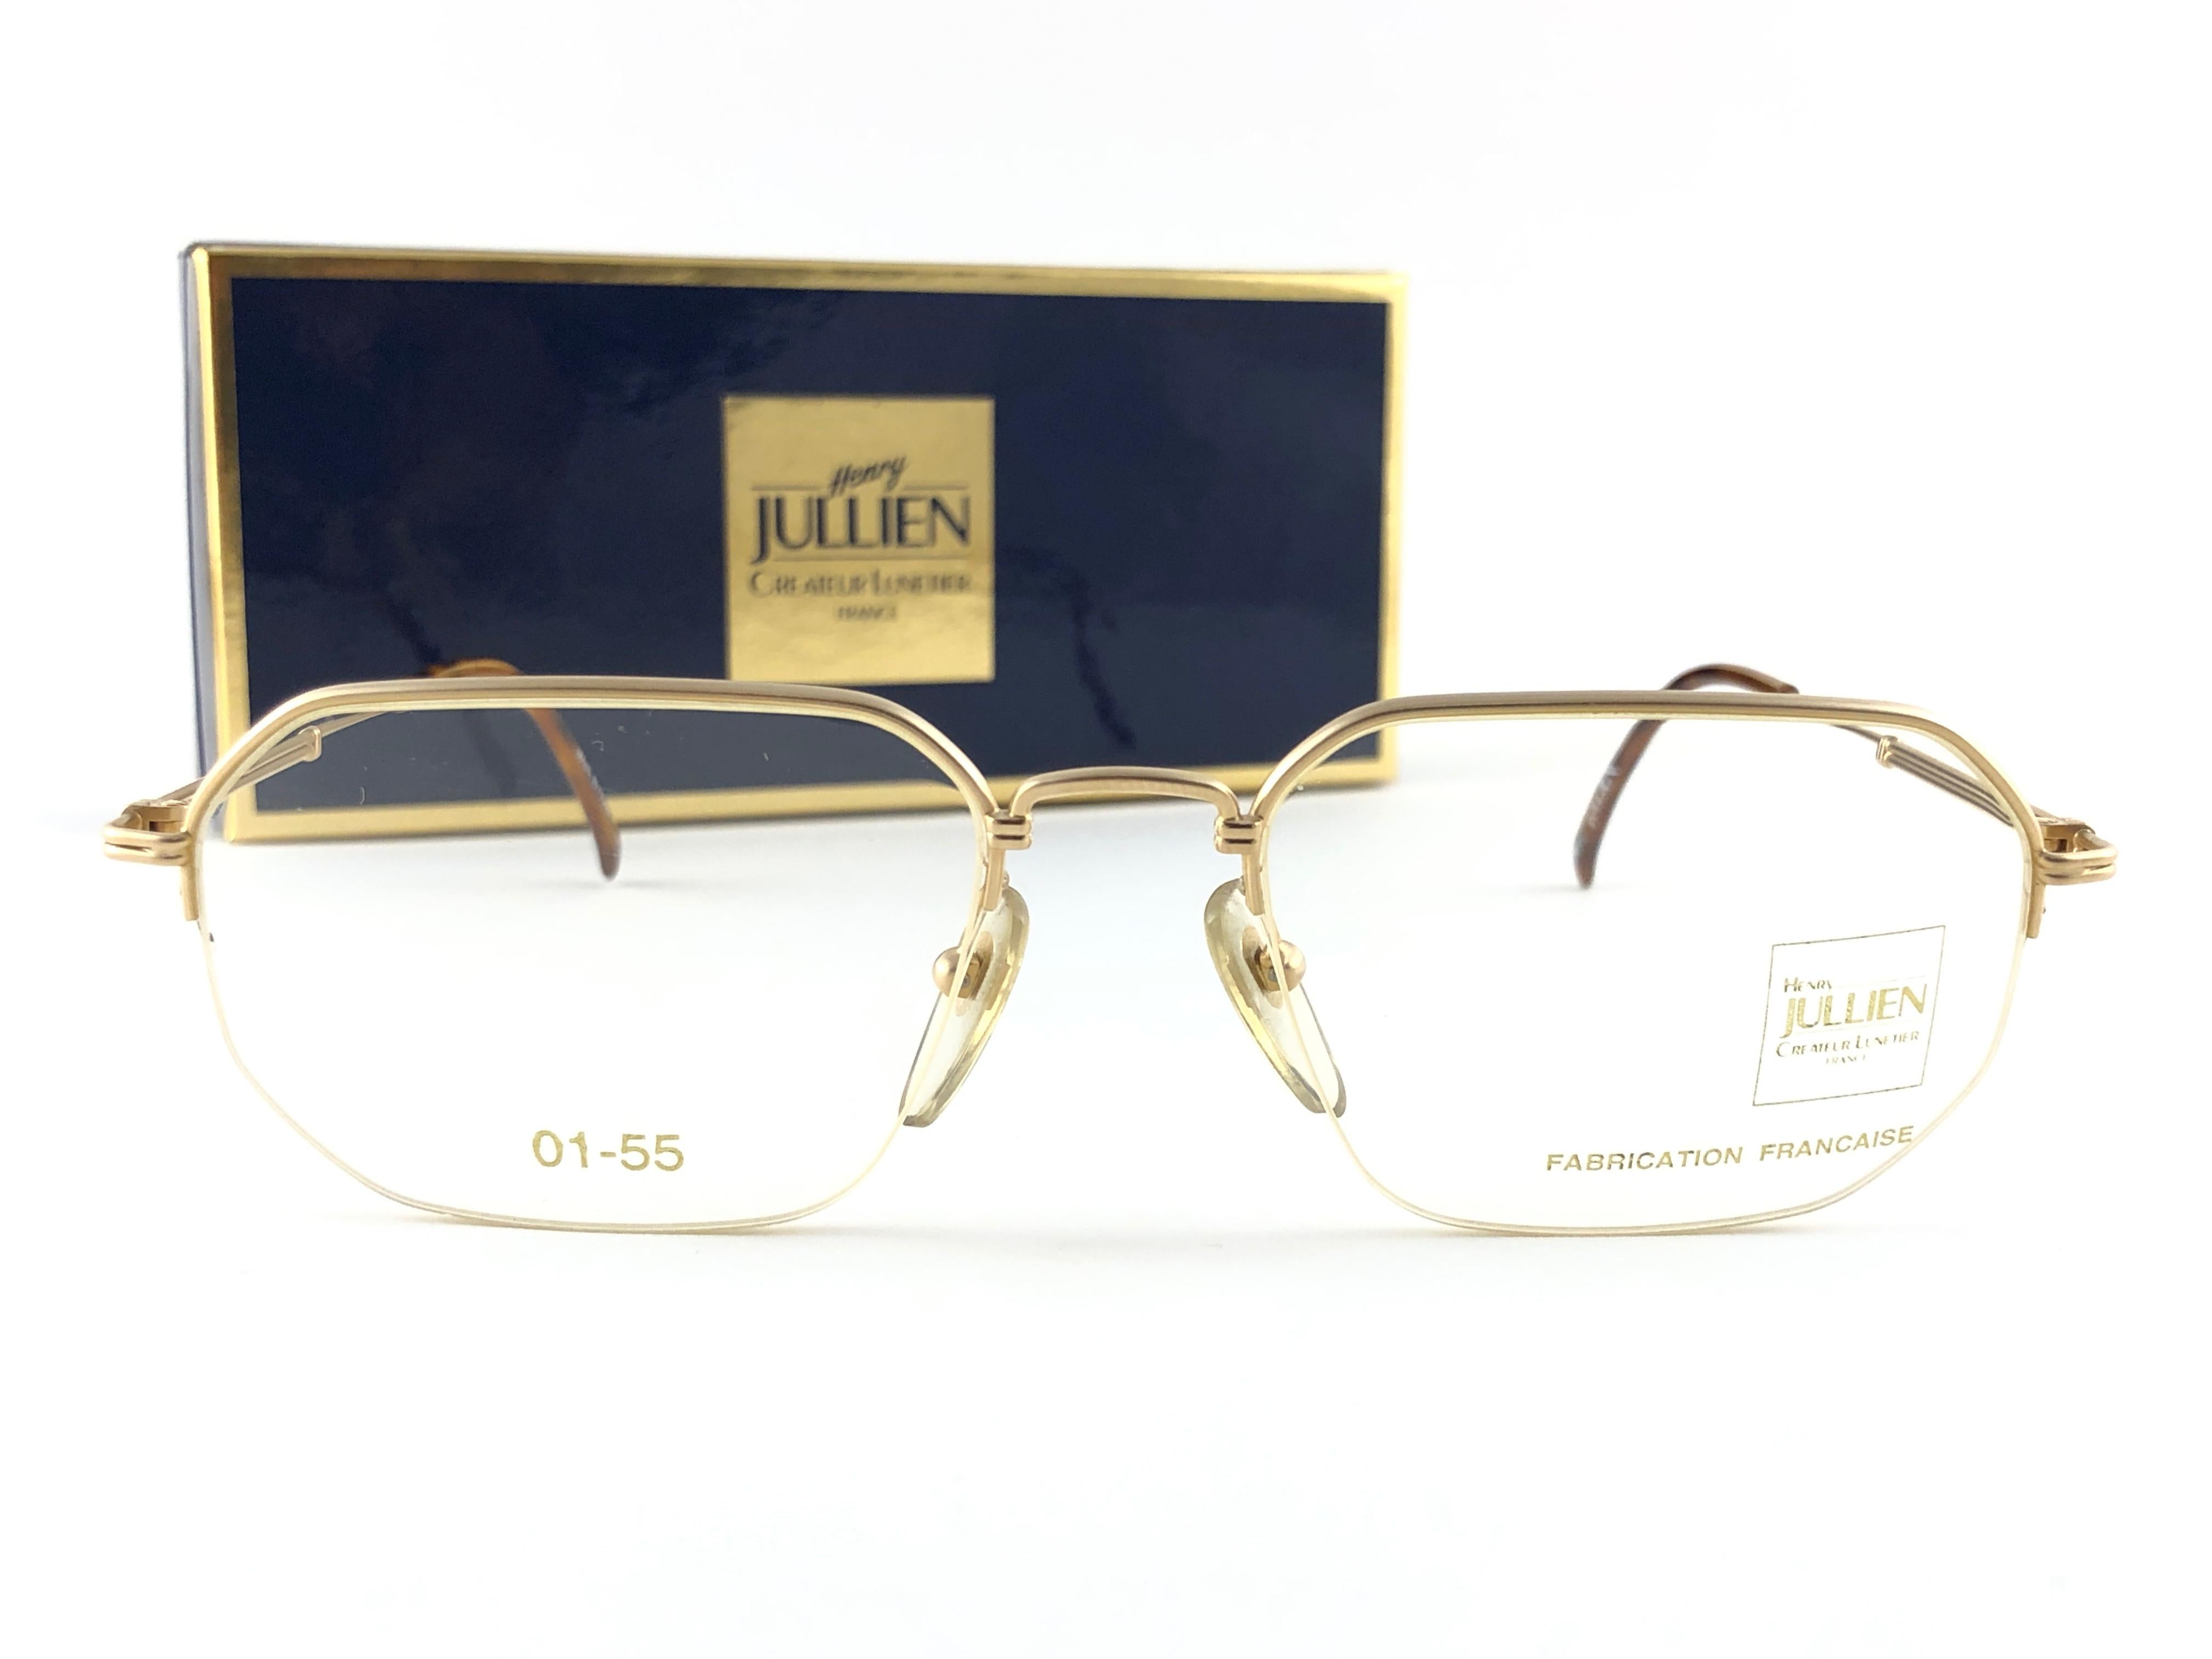 New Henry Jullien gold plated half frame. Ready for prescription lenses.

Made in France
 
Produced and design in 1990's.

This item may show minor sign of wear due to storage.

FRONT 13 CMS
LENS HEIGHT 4 CMS
LENS WIDTH 5.2 CMS